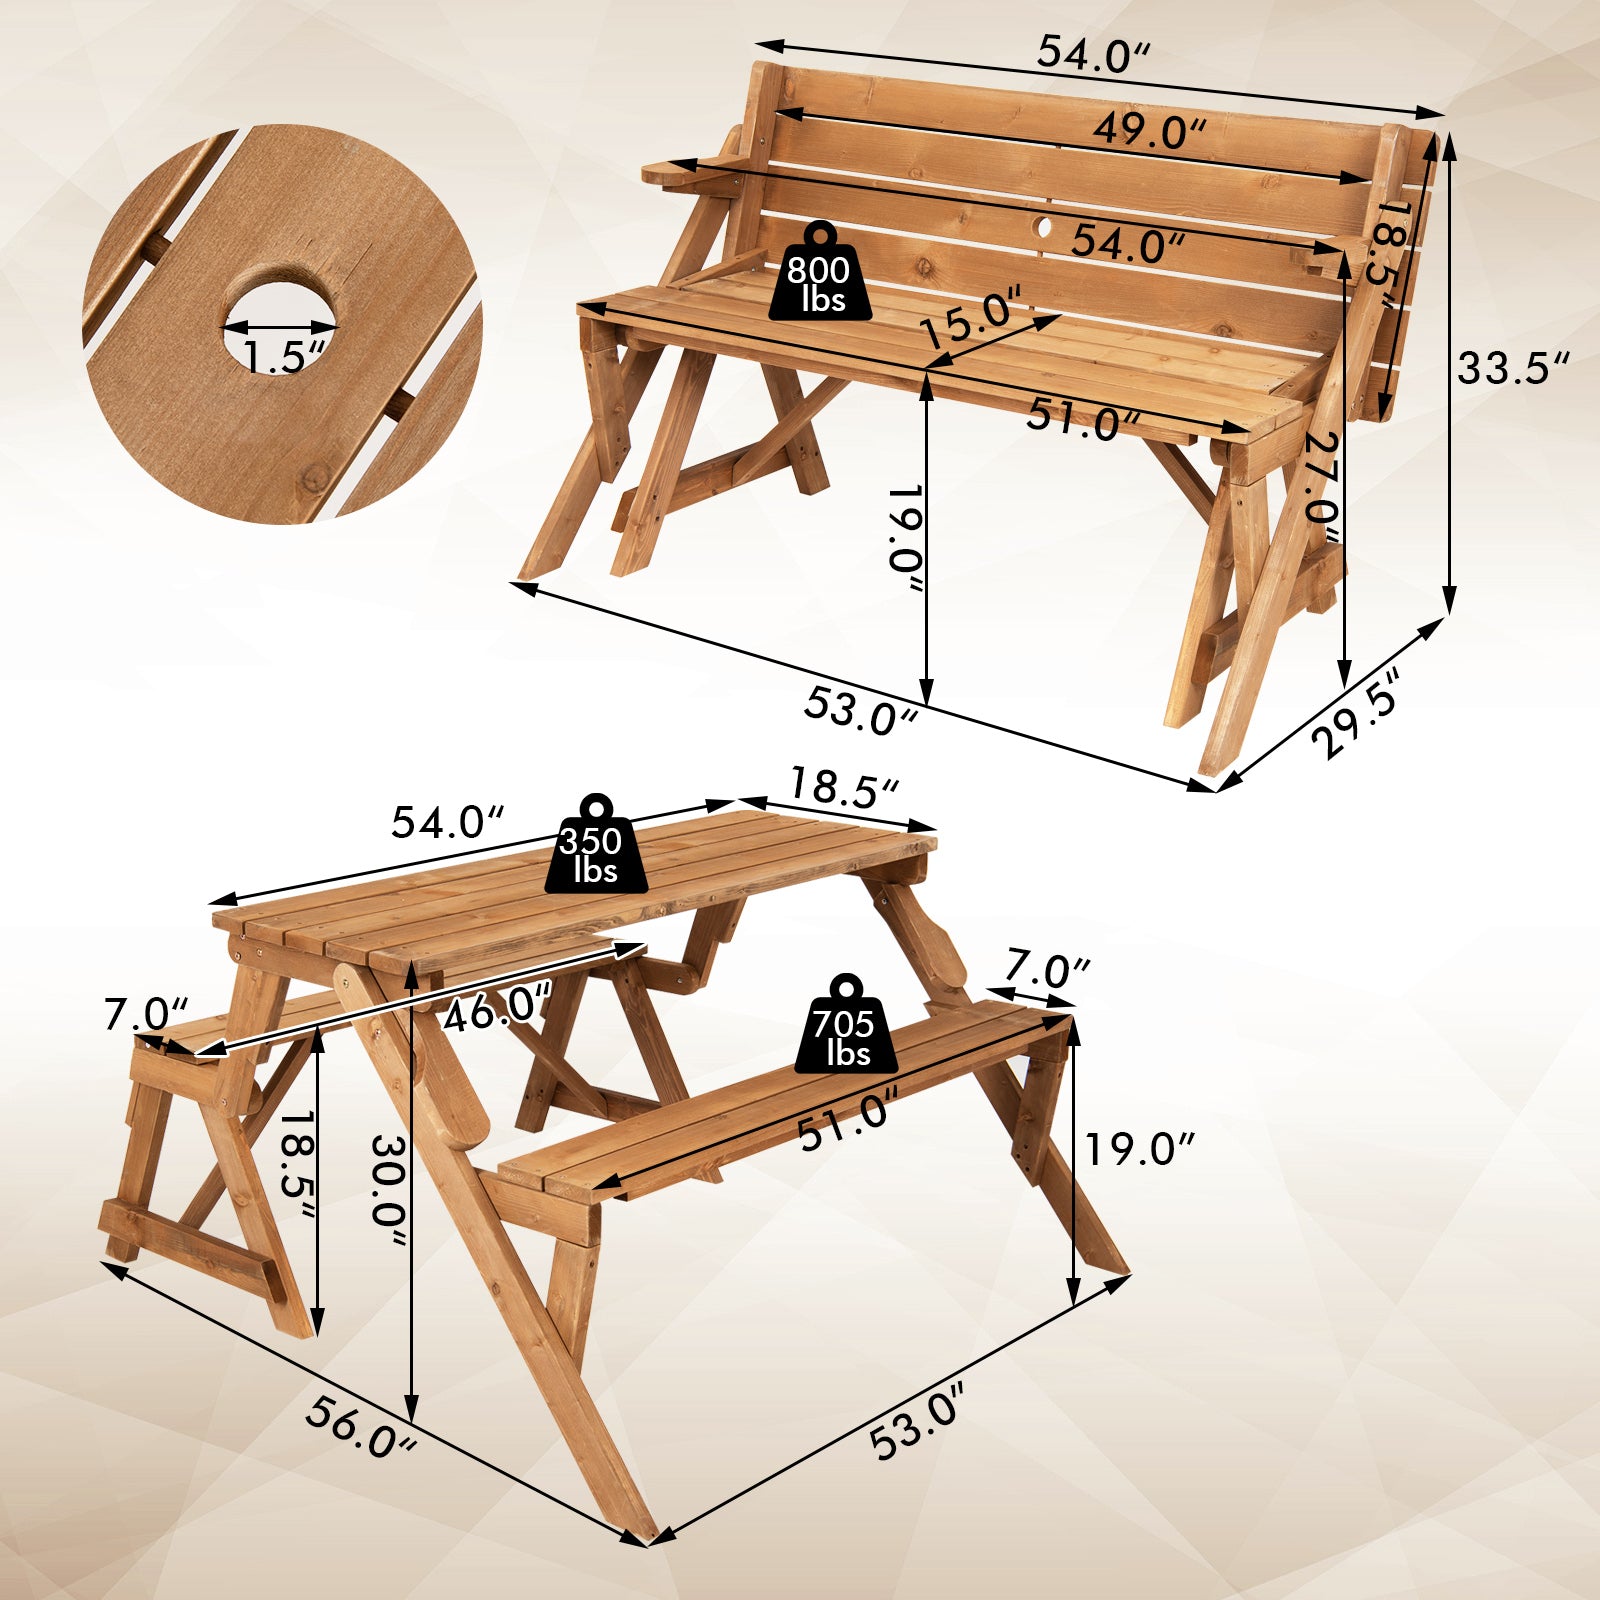 2-in-1 Transforming Interchangeable Wooden Picnic Table Bench with Umbrella Hole, Dark Brown - Gallery Canada